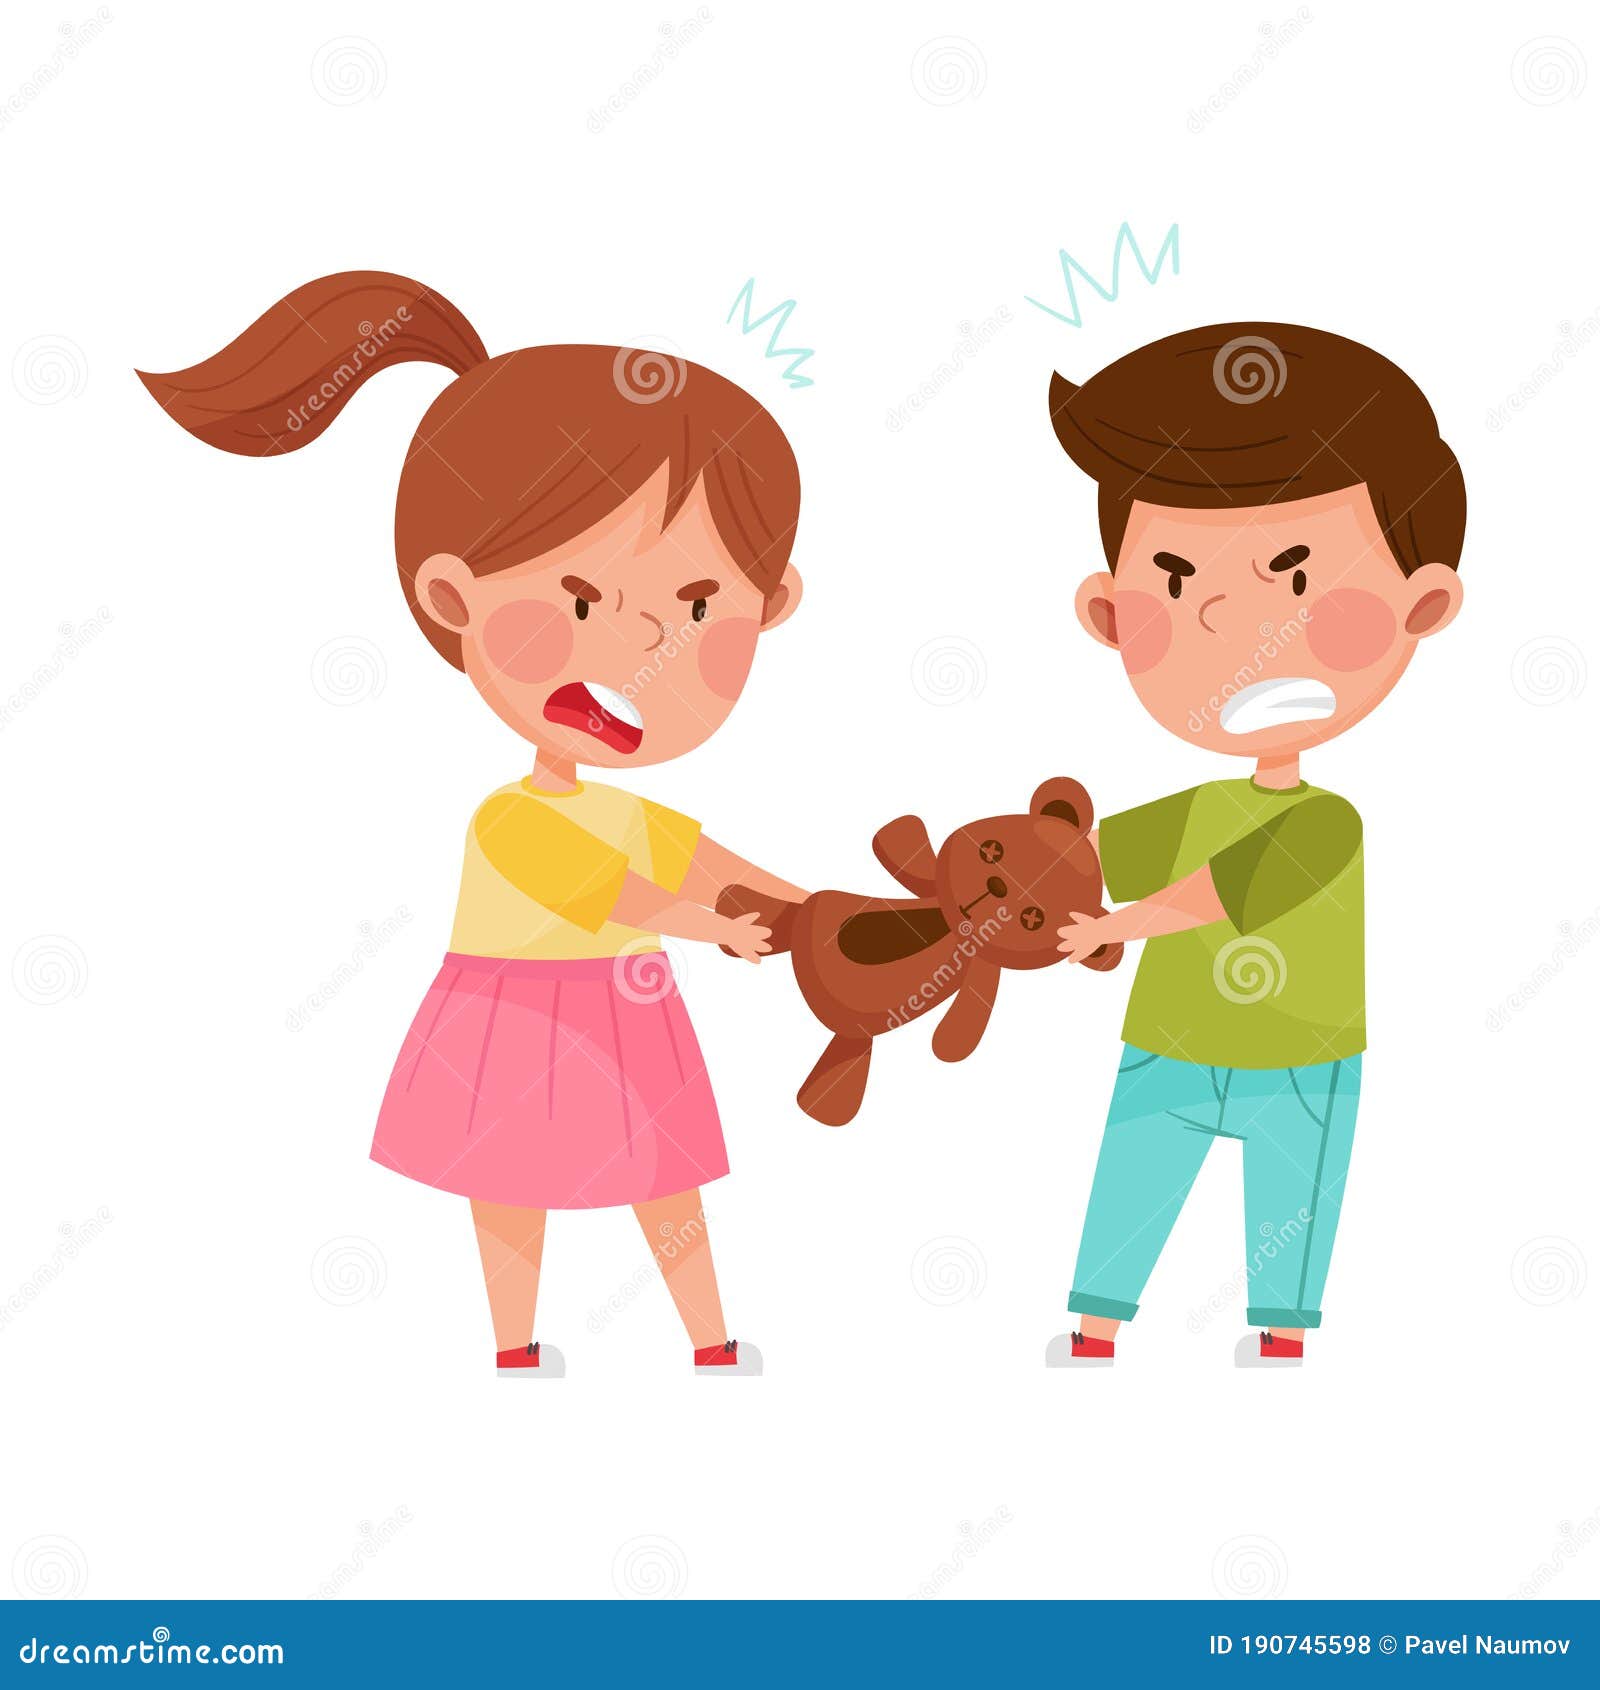 hostile-kids-angry-grimace-fighting-over-toy-bear-vector-illustration-boy-girl-characters-having-conflict-showing-190745598.jpg